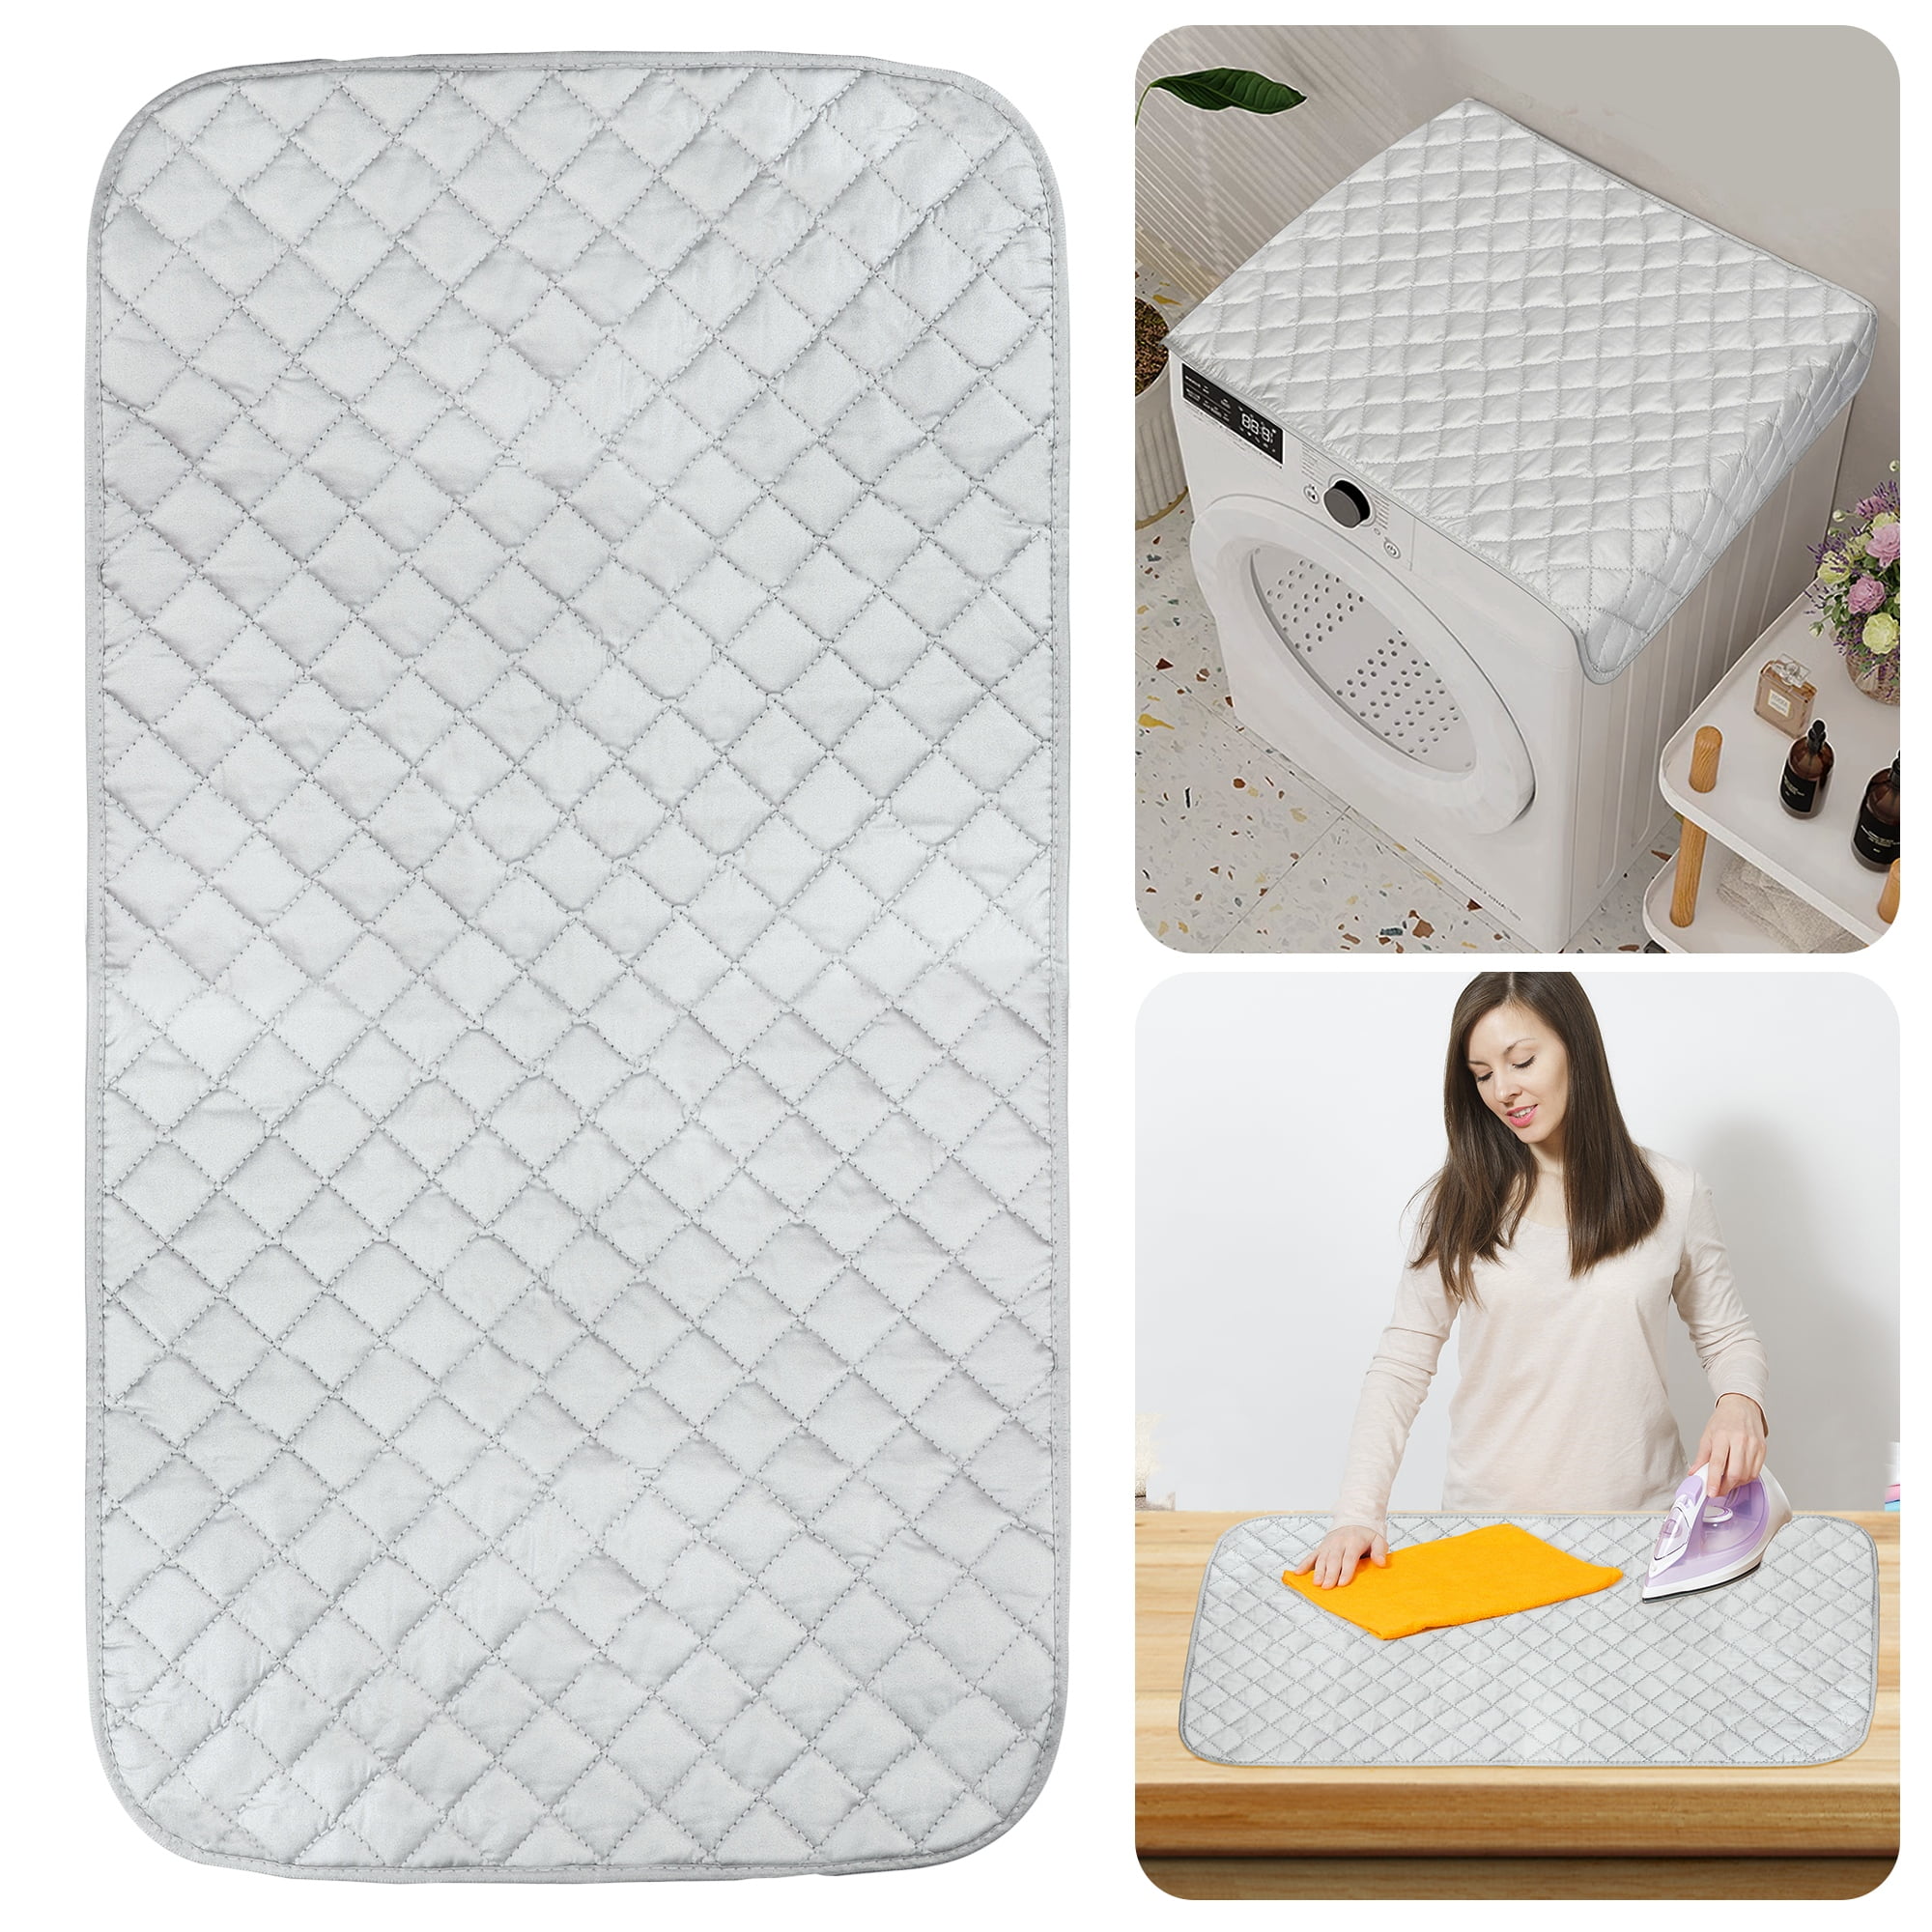  Football Soccer Ironing Mat for Table Top Portable Ironing  Board Cover Pad Blanket for Travel Washer Dryer Countertop : Home & Kitchen